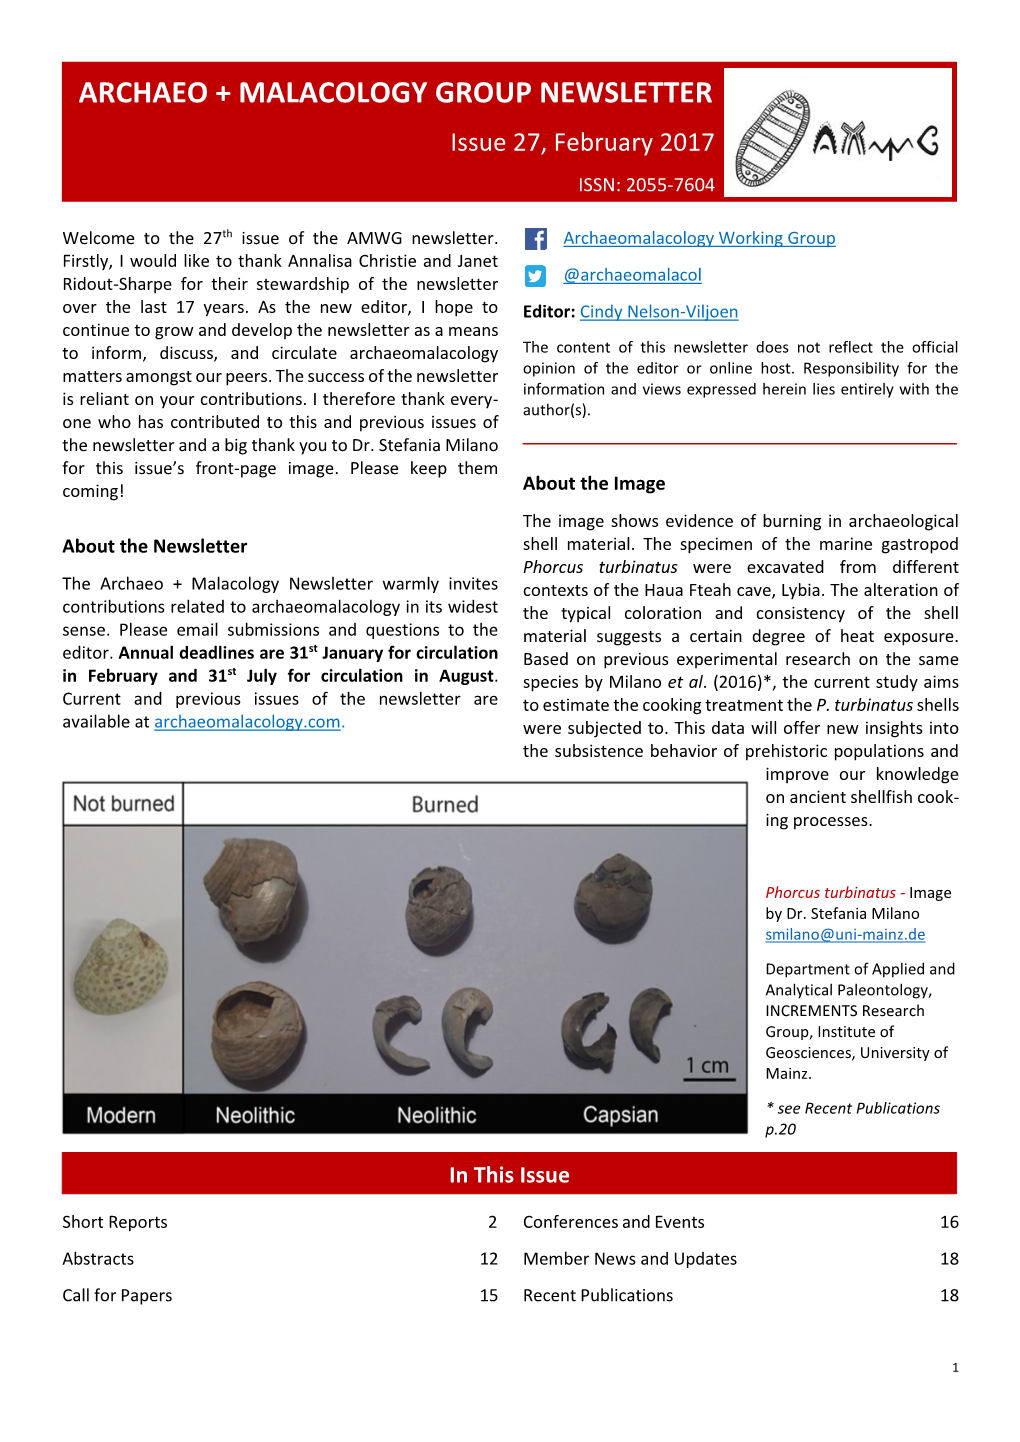 Archaeo + Malacology Group Newsletter, Issue 27, February 2017